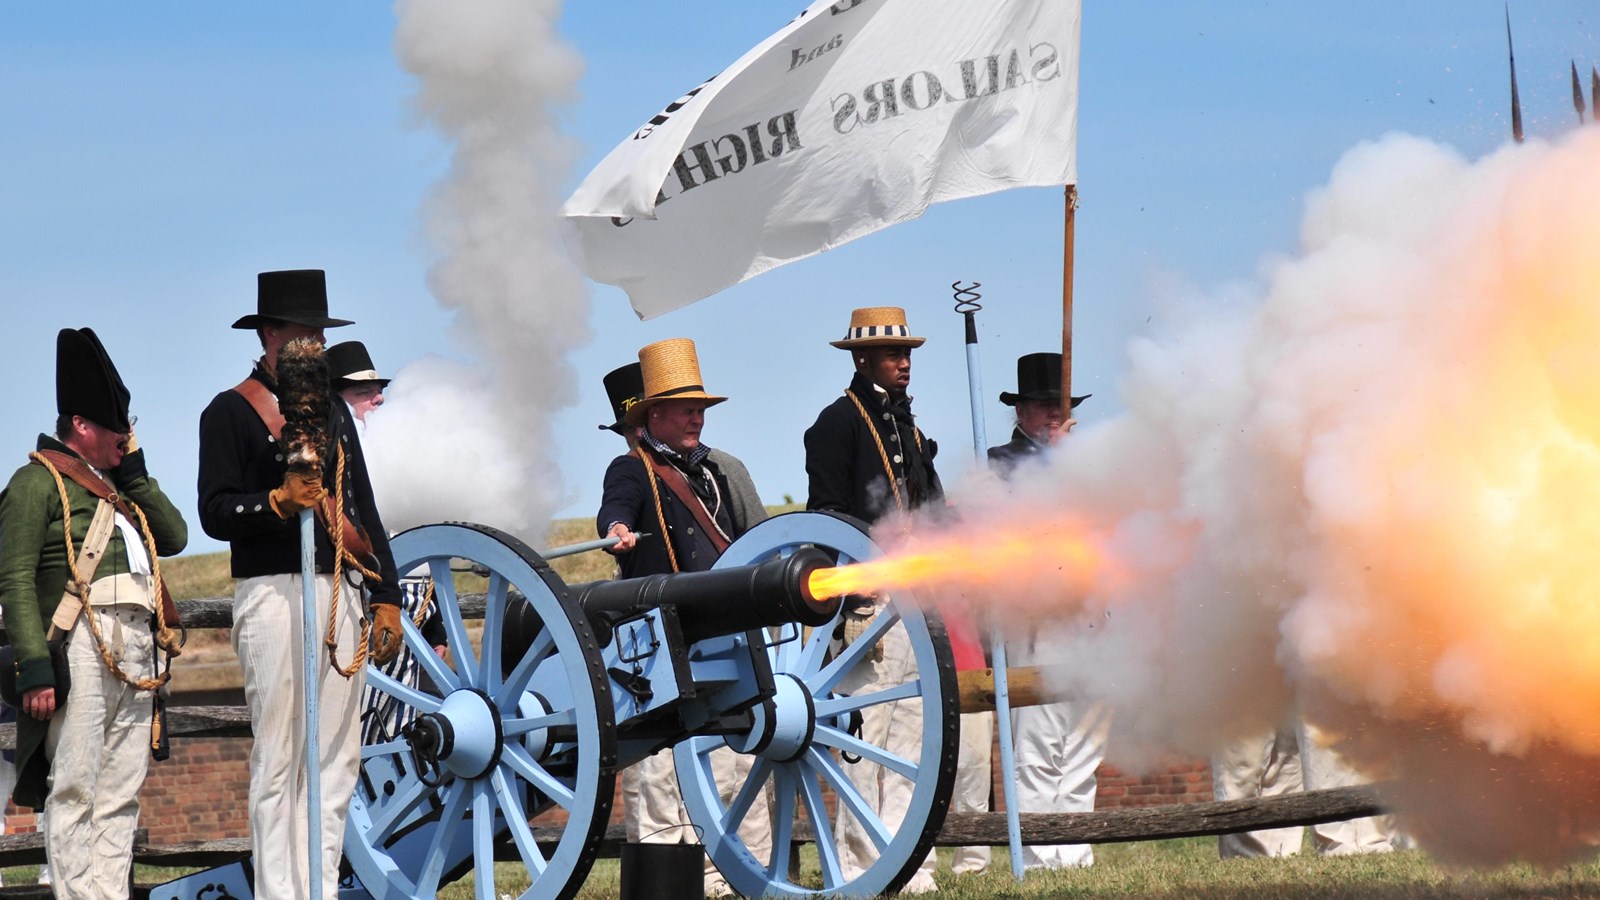 A group of people in period clothing stand next to a firing canon.